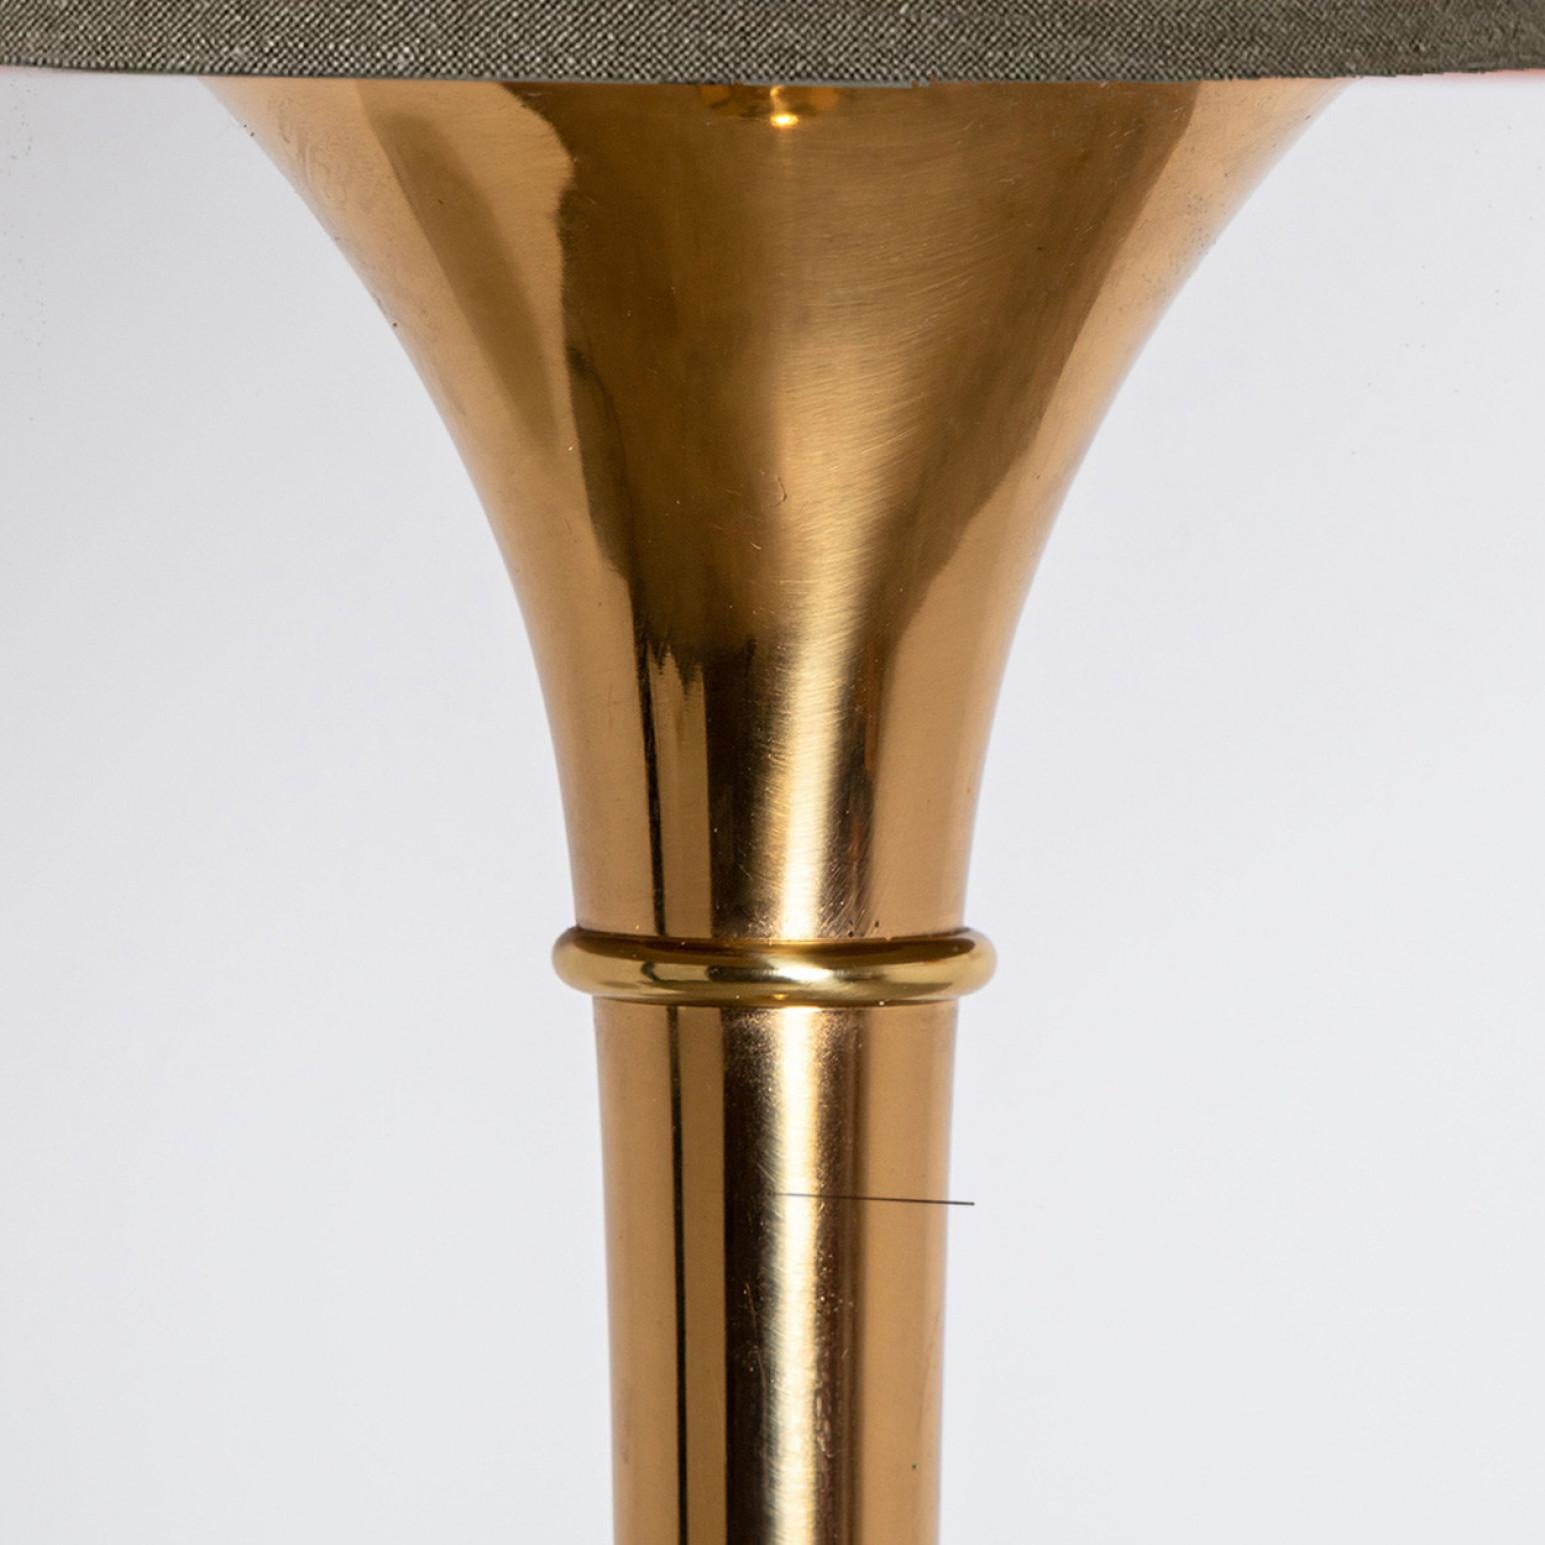 Pair of elegant gold brass wooden floor lamps Model designed by Ingo Maurer, 1968 for Design M Munich, Germany.
With new wood custom made lamp shades with Bronze inner shade. Made by Rene Houben. Also other lampshades available. Ask for additional